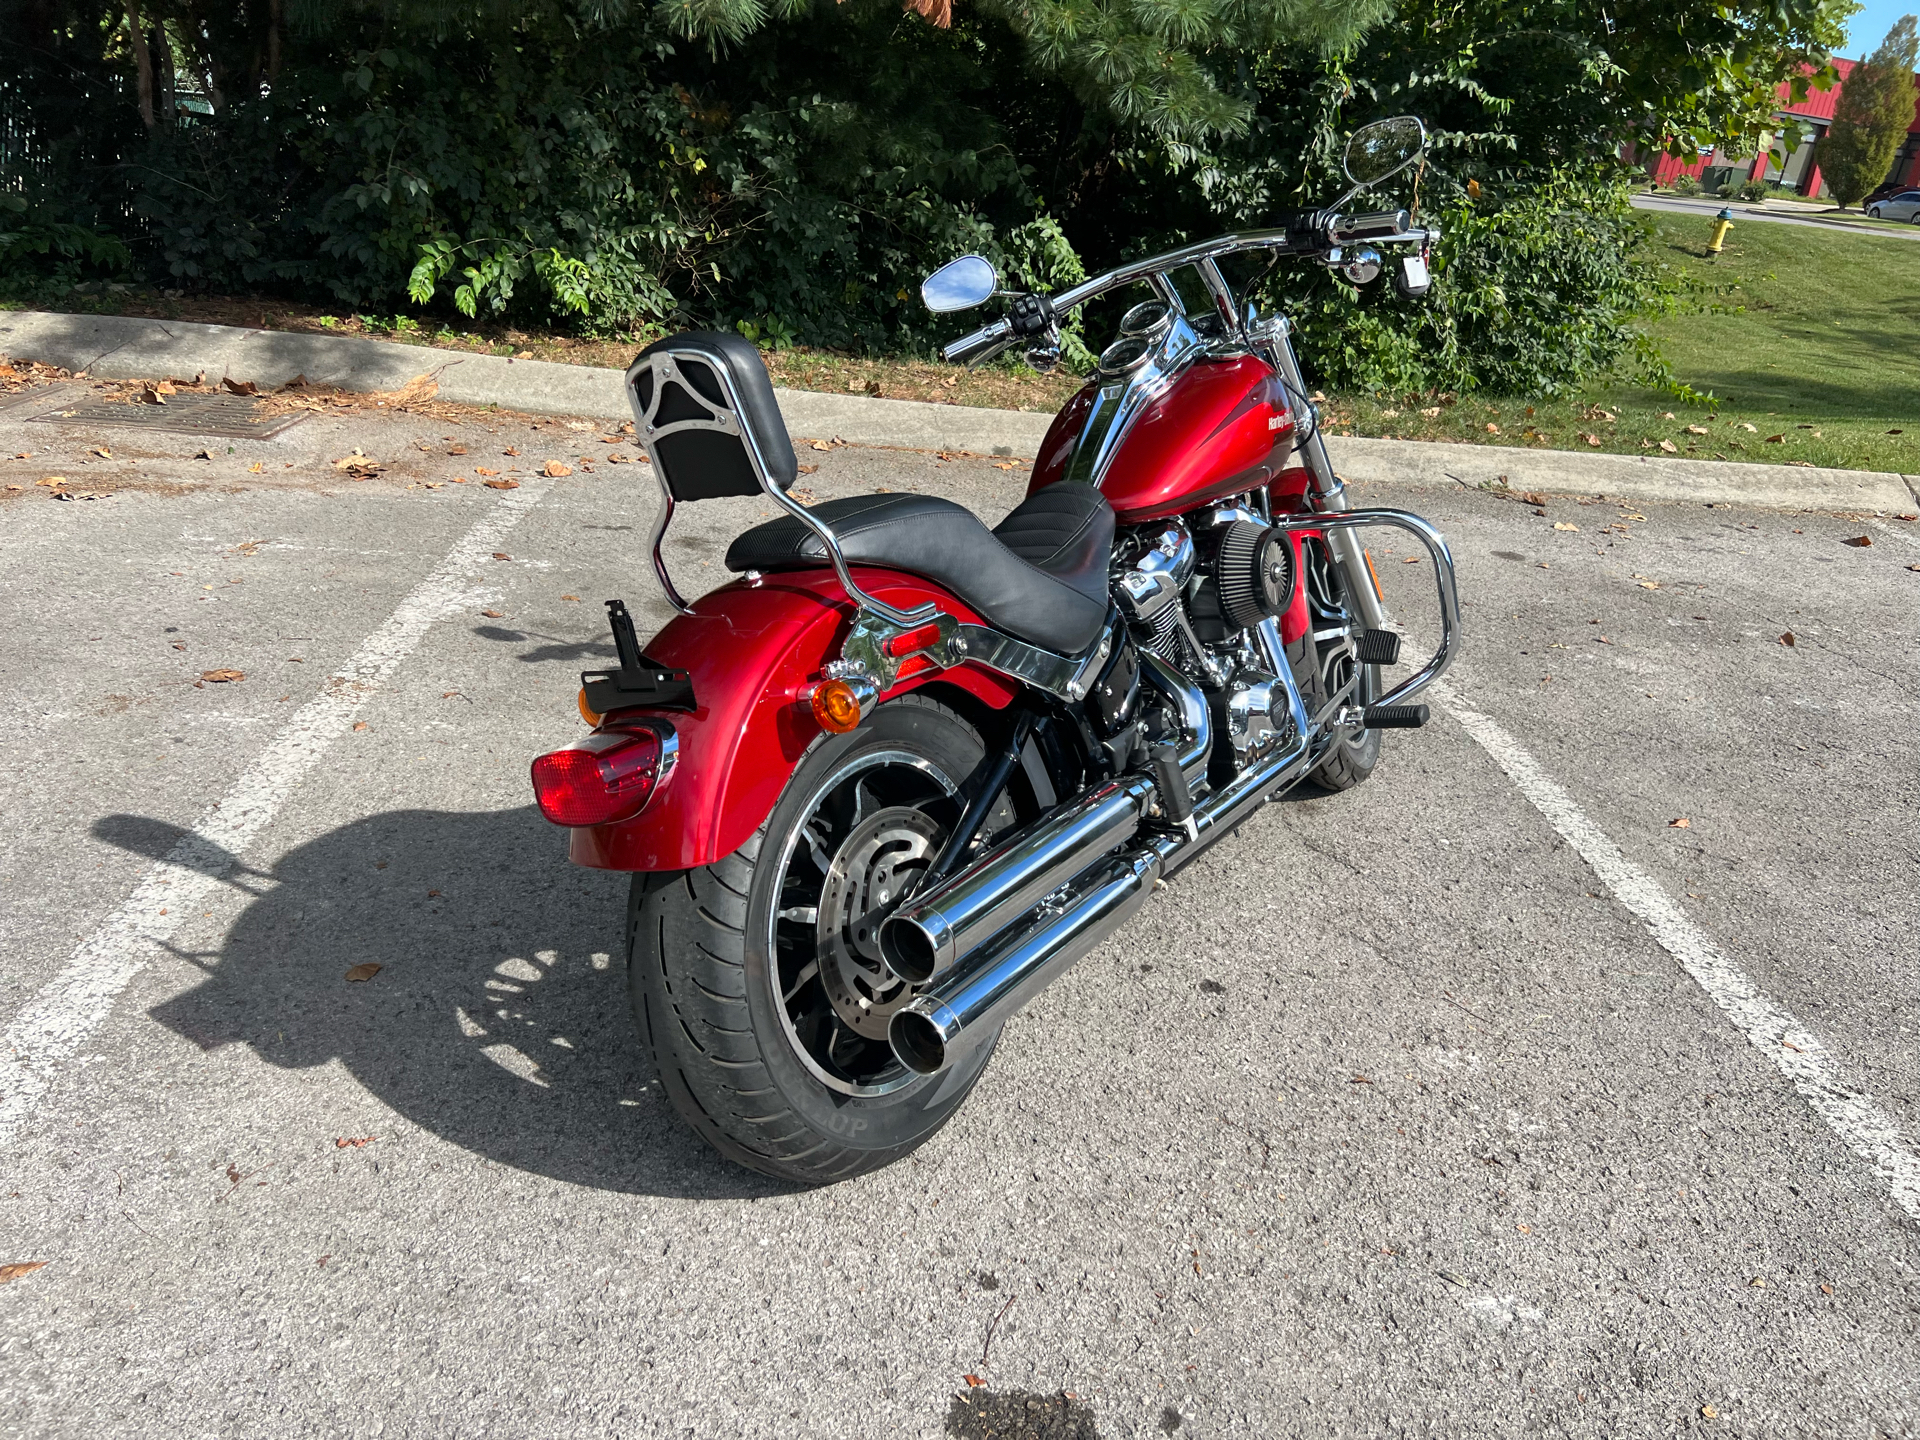 2018 Harley-Davidson Low Rider® 107 in Franklin, Tennessee - Photo 13